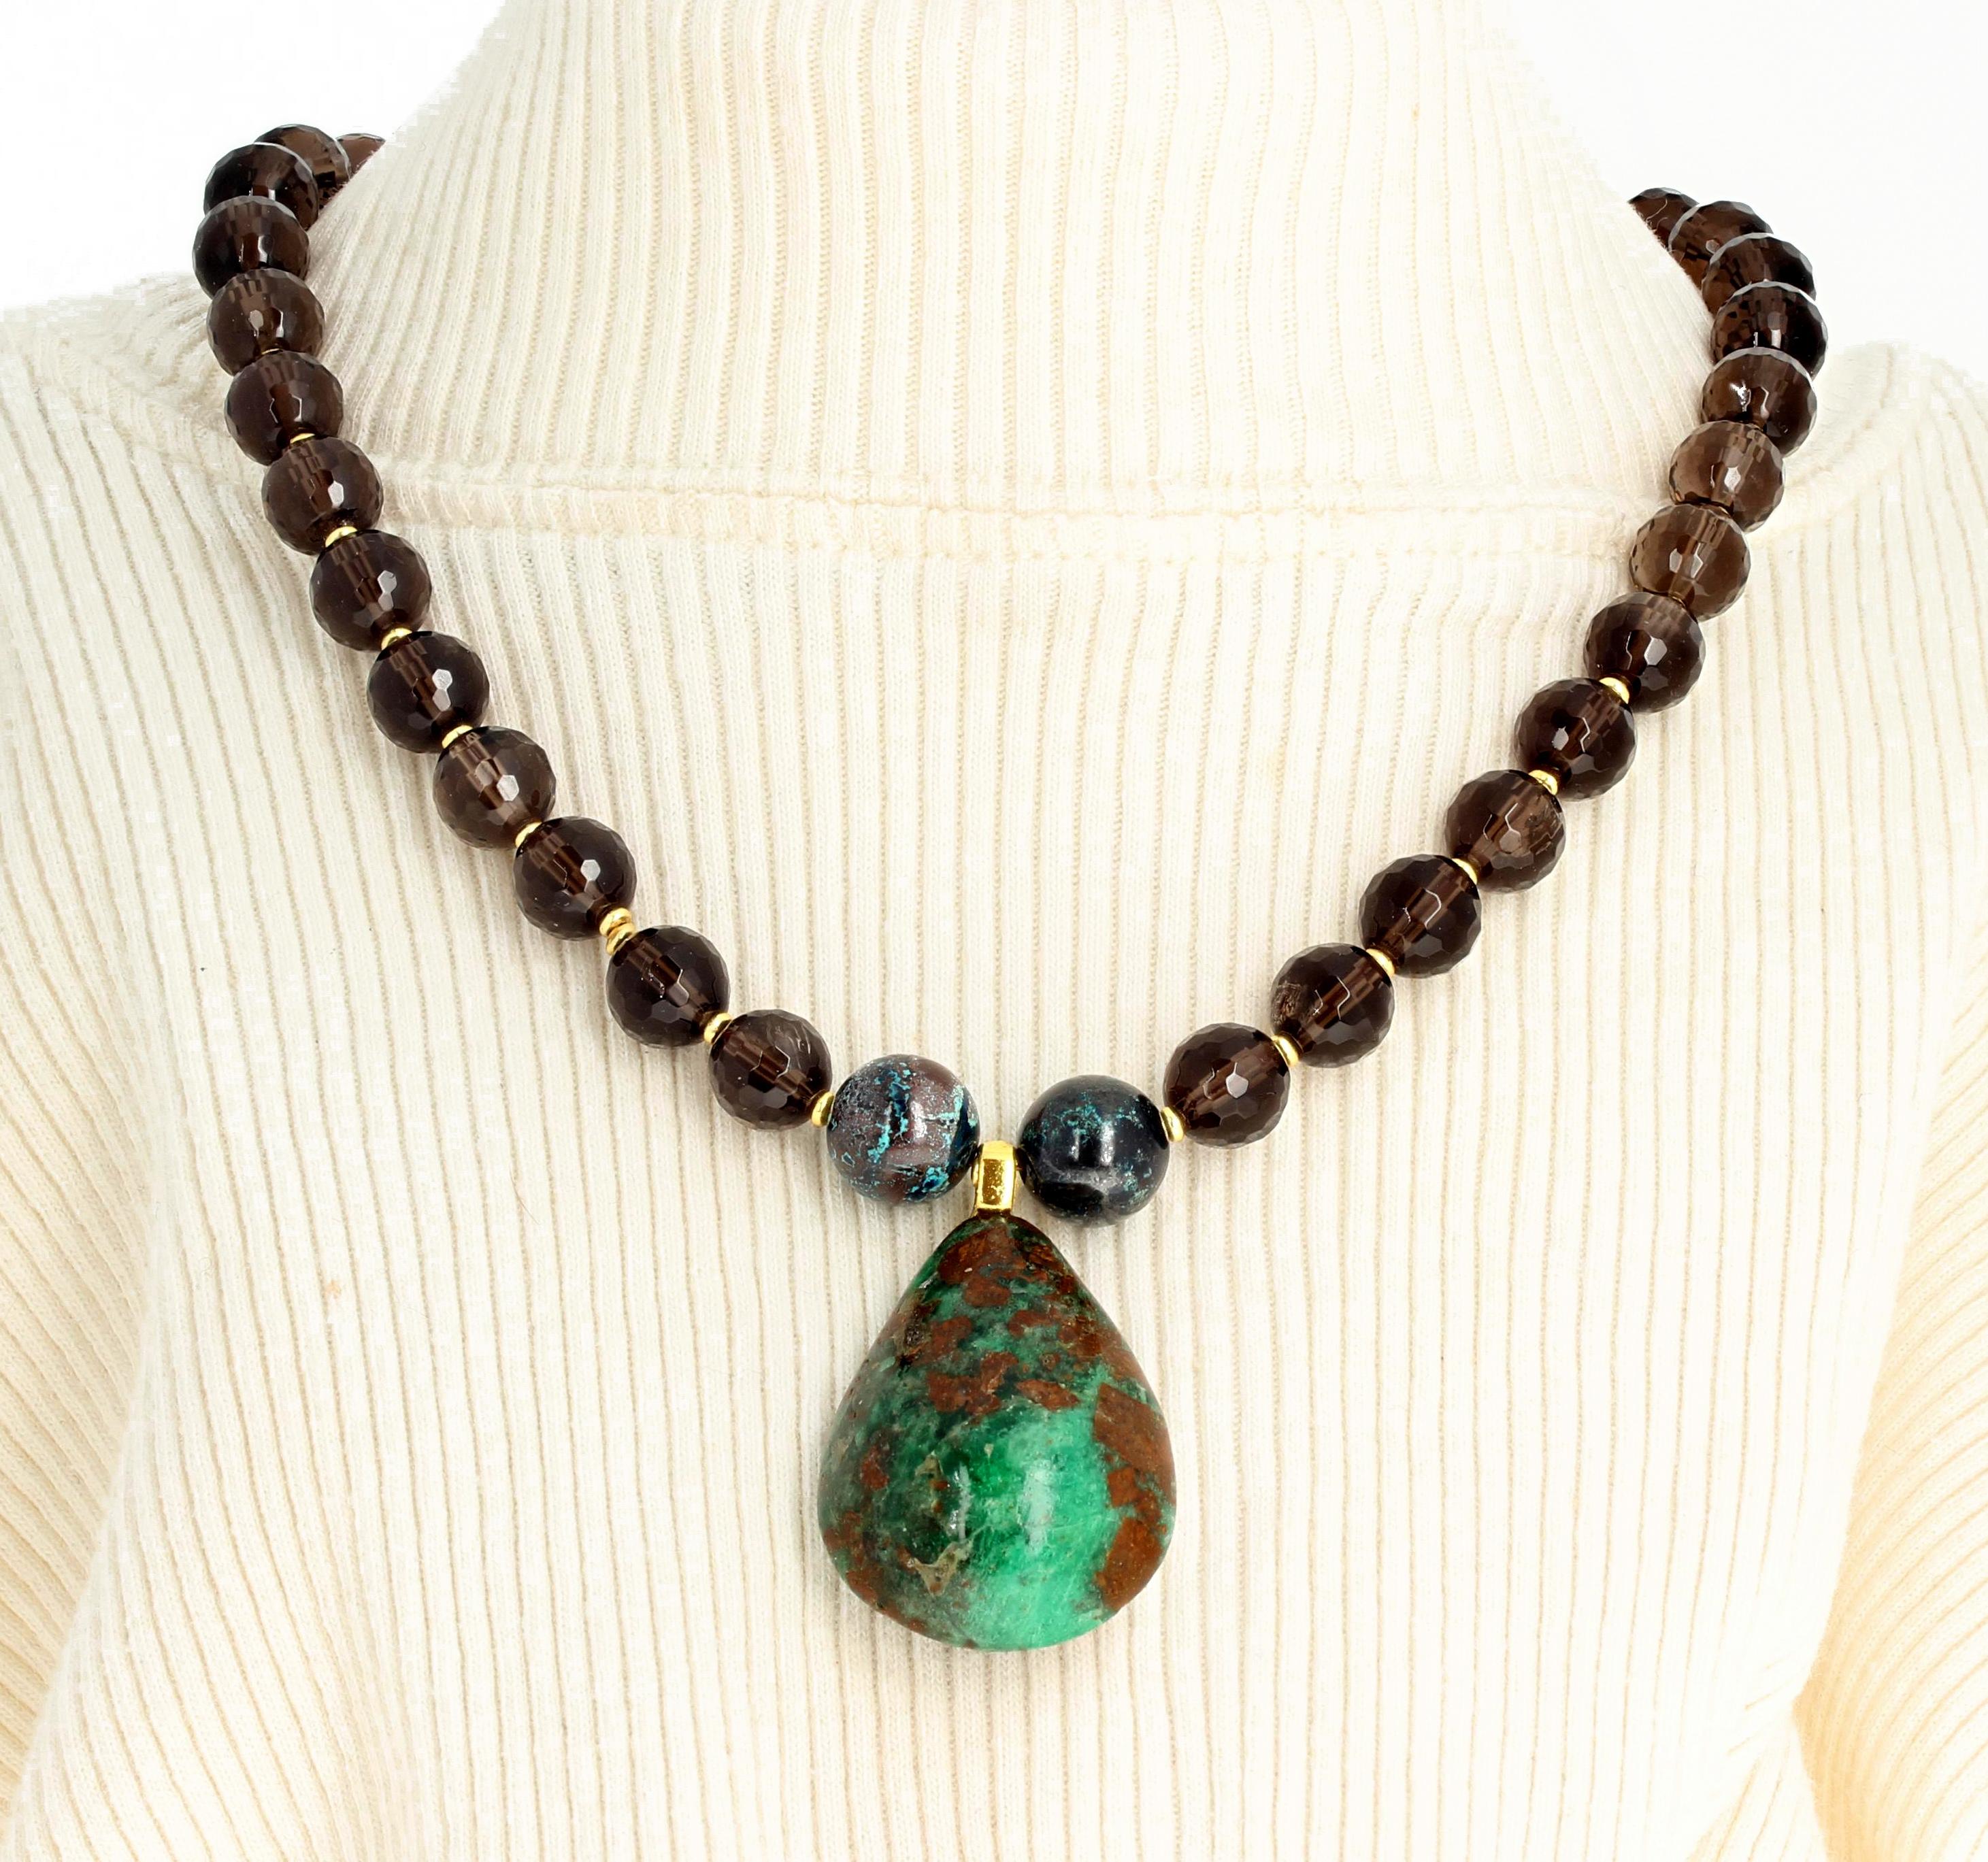 Beautiful natural real Emerald pear cut and polished rock gem (38.7 mm x 28.2 mm) swings elegantly between two Chrysocollas (shattuckite) on this checkerboard gem cut translucent glowing Smoky Quartz handmade 15 inches long necklace enhanced with